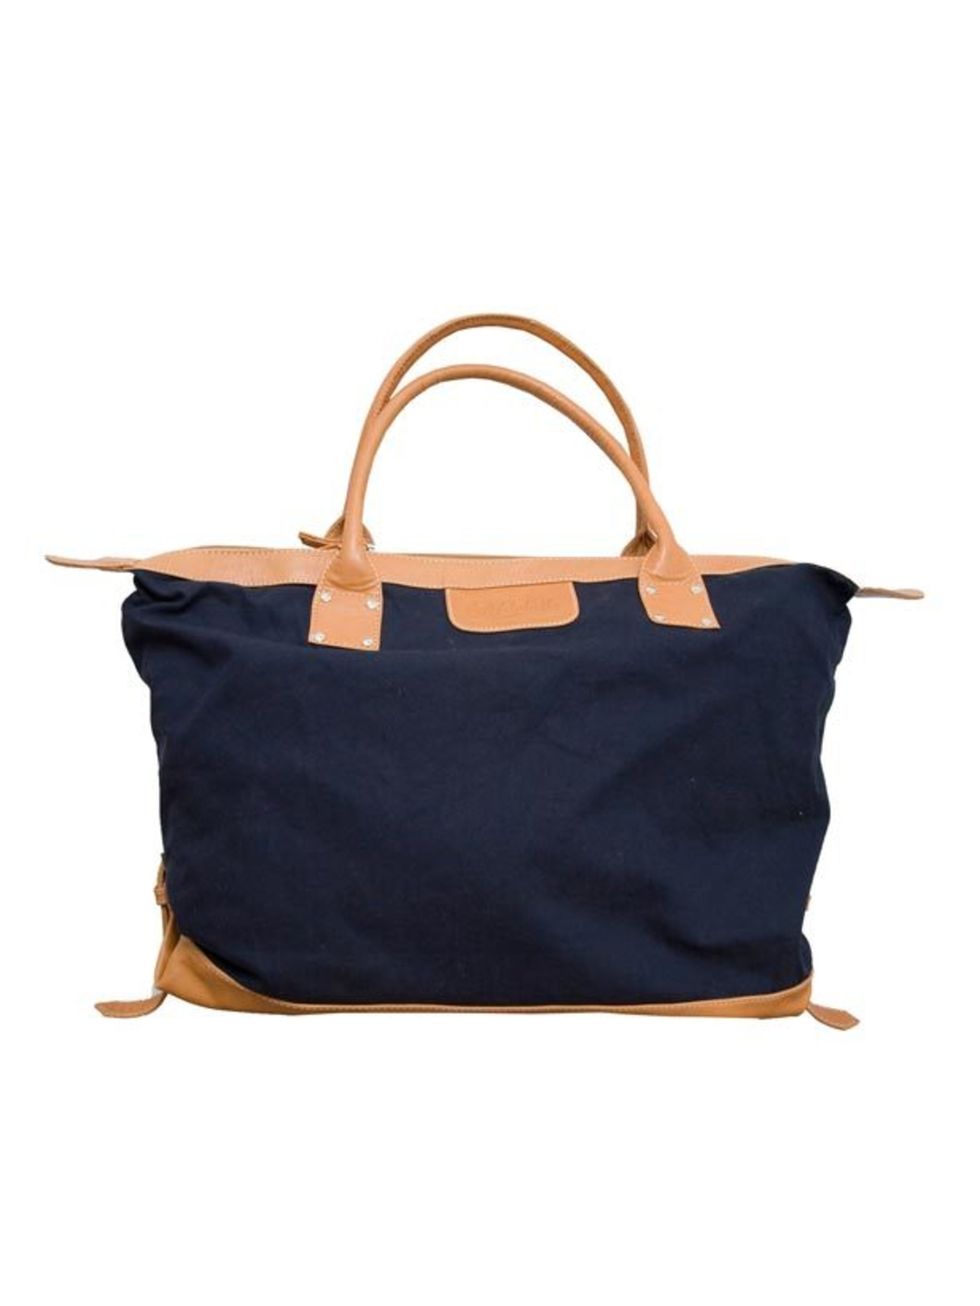 <p>If youre planning any weekend mini breaks this summer, make sure you travel in style by investing in a new bag. Melabelle is our top recommendation <a href="http://www.melabelle.com/">Melabelle</a> navy bag, £98</p>